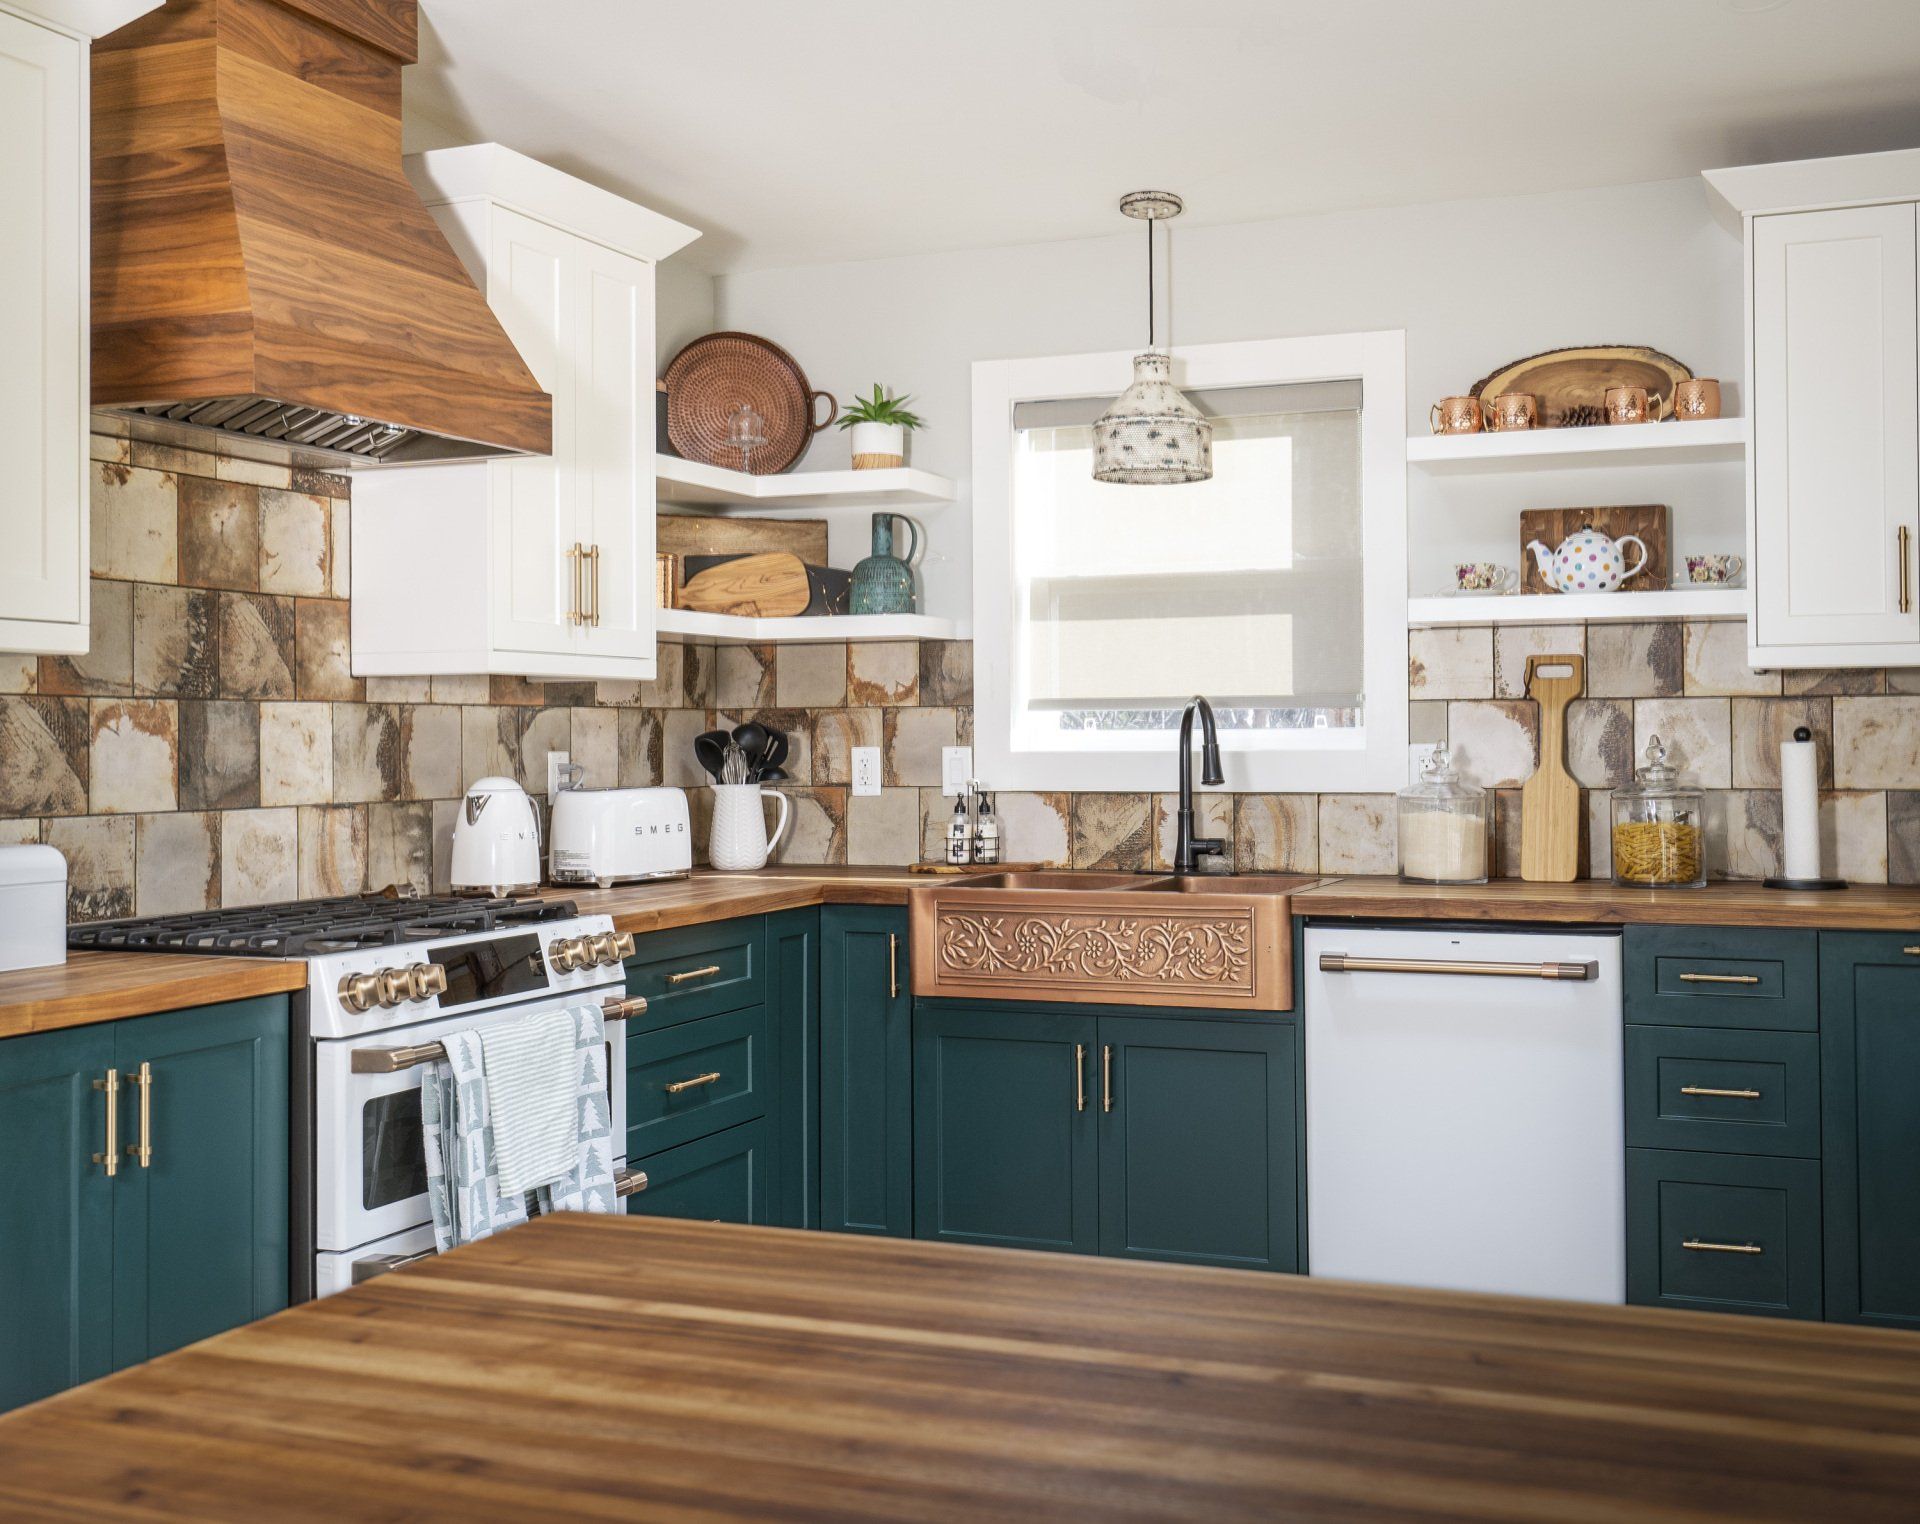 YourStyle Kitchens: Our Transitional Theme